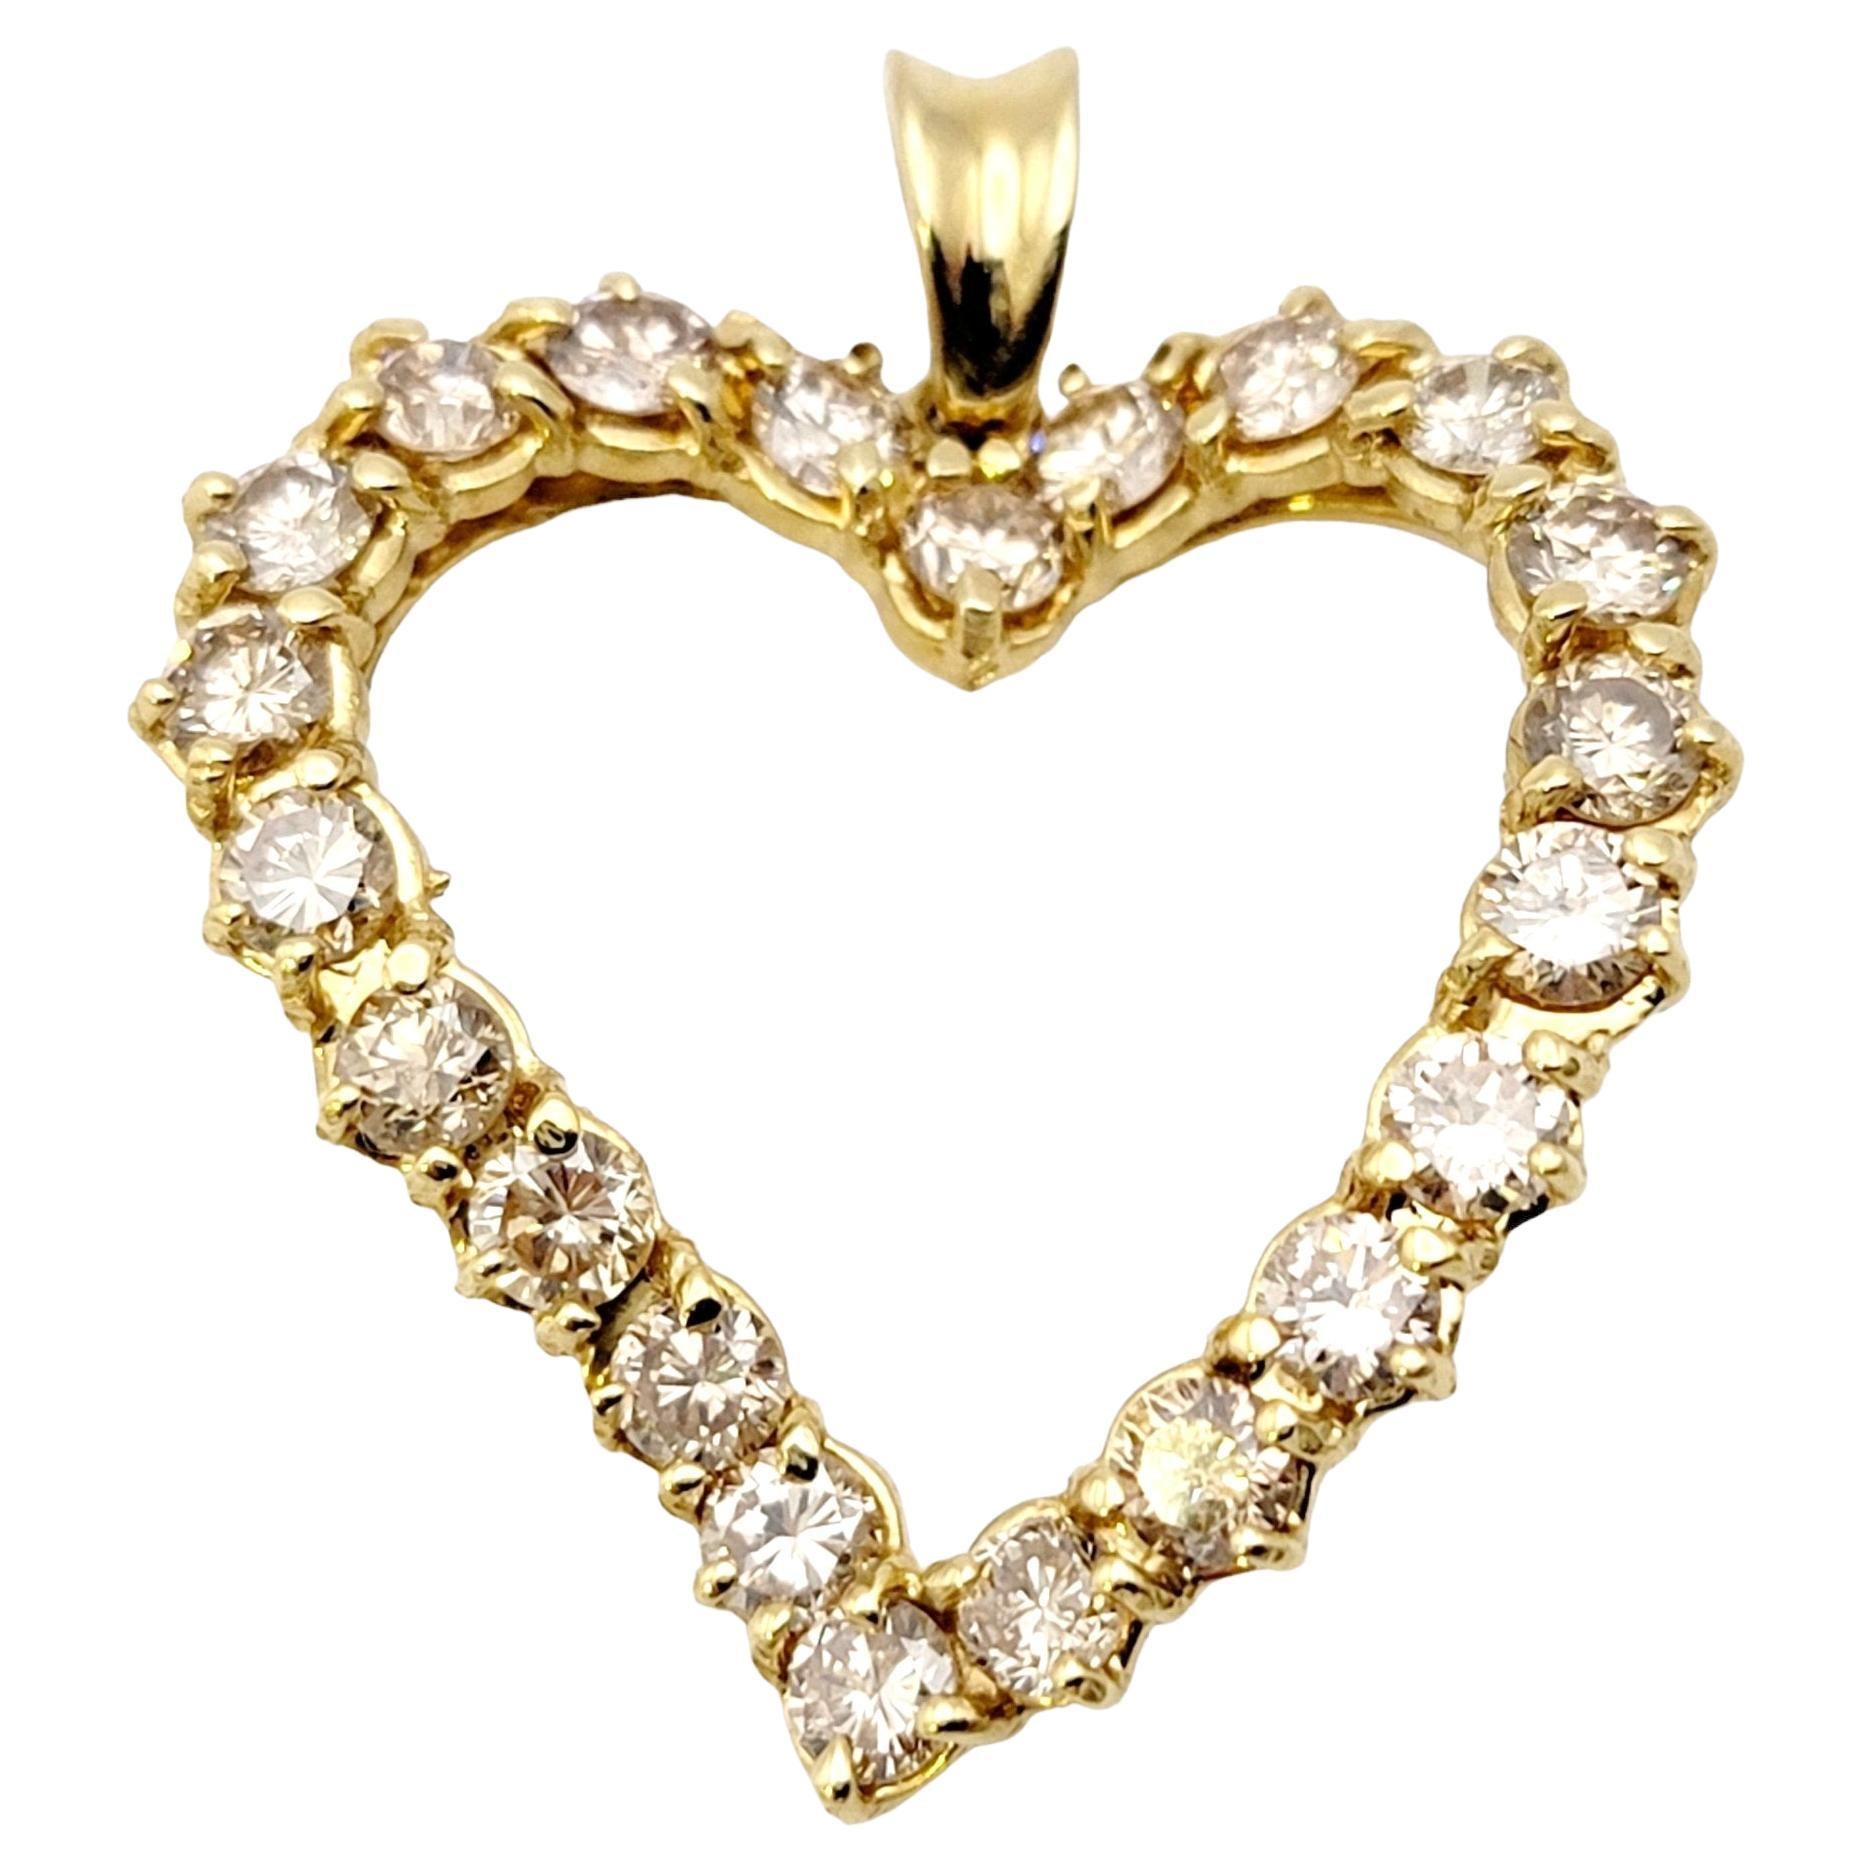 4.25 Carats Champagne Diamond Curved Open Heart Pendant in 14 Karat Yellow Gold